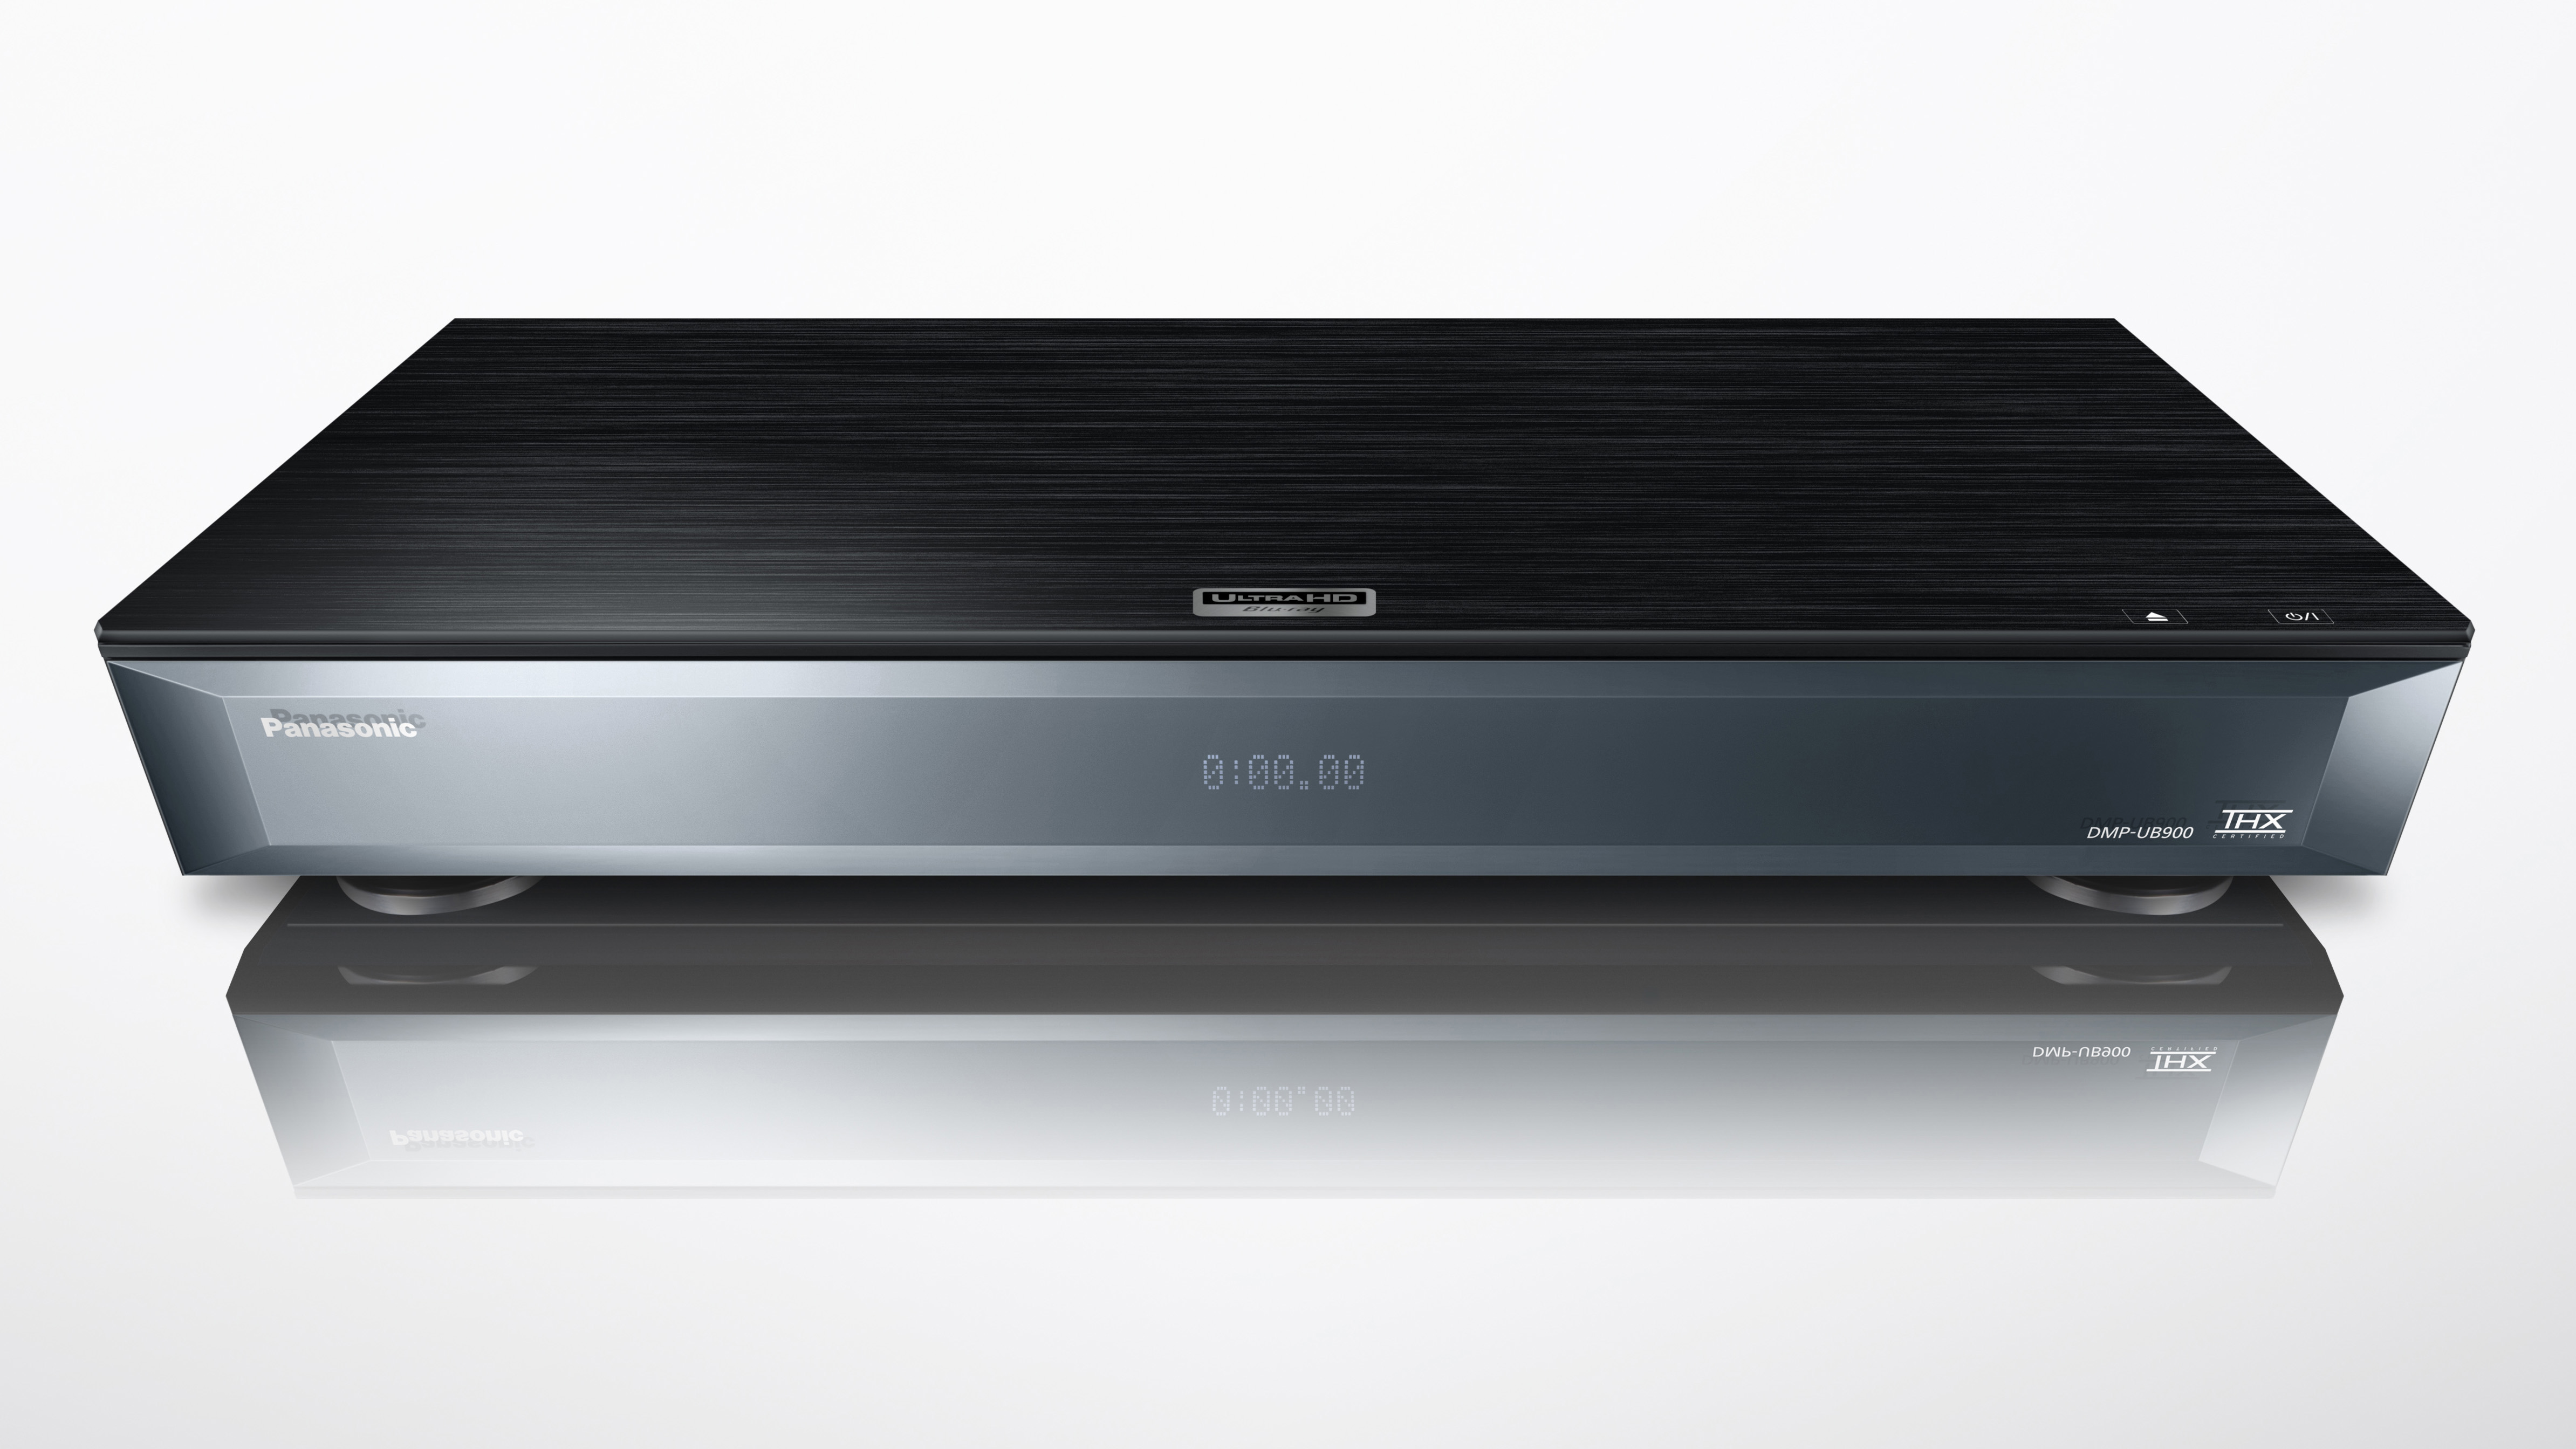 The Best 4k Ultra Hd Blu Ray Players You Can Buy Right Now Tech News